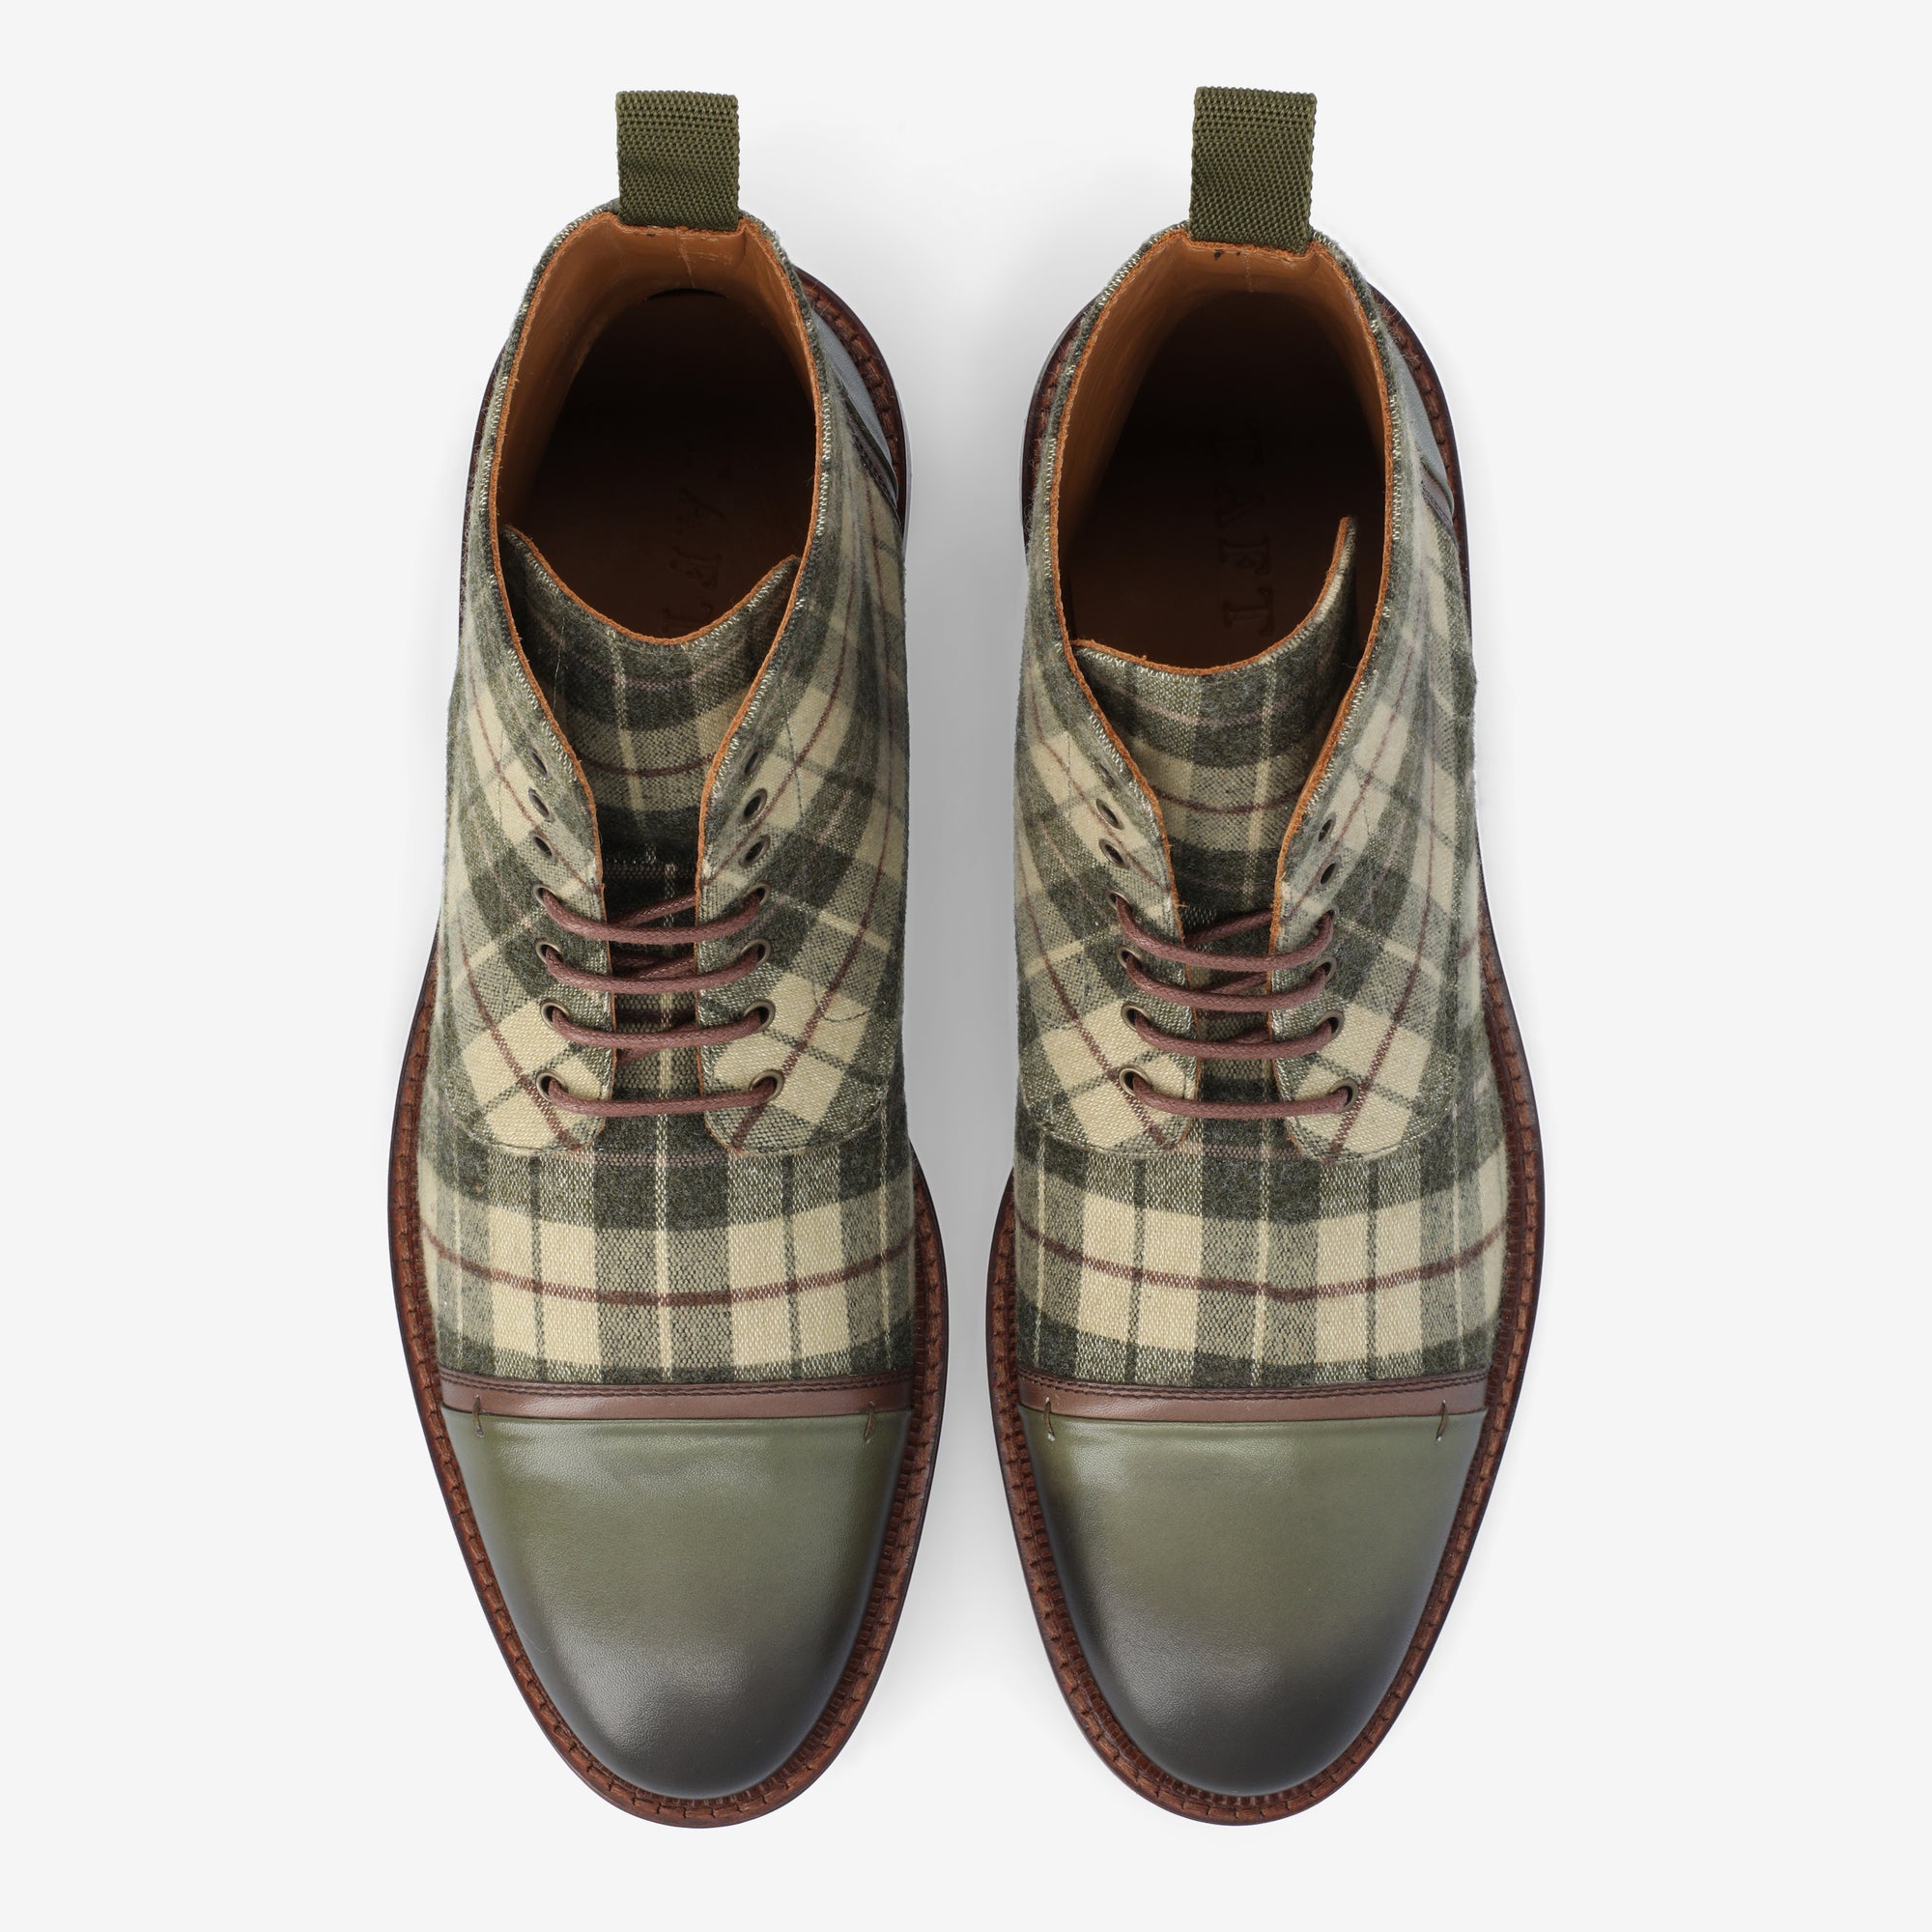 The Jack Boot in Green Plaid